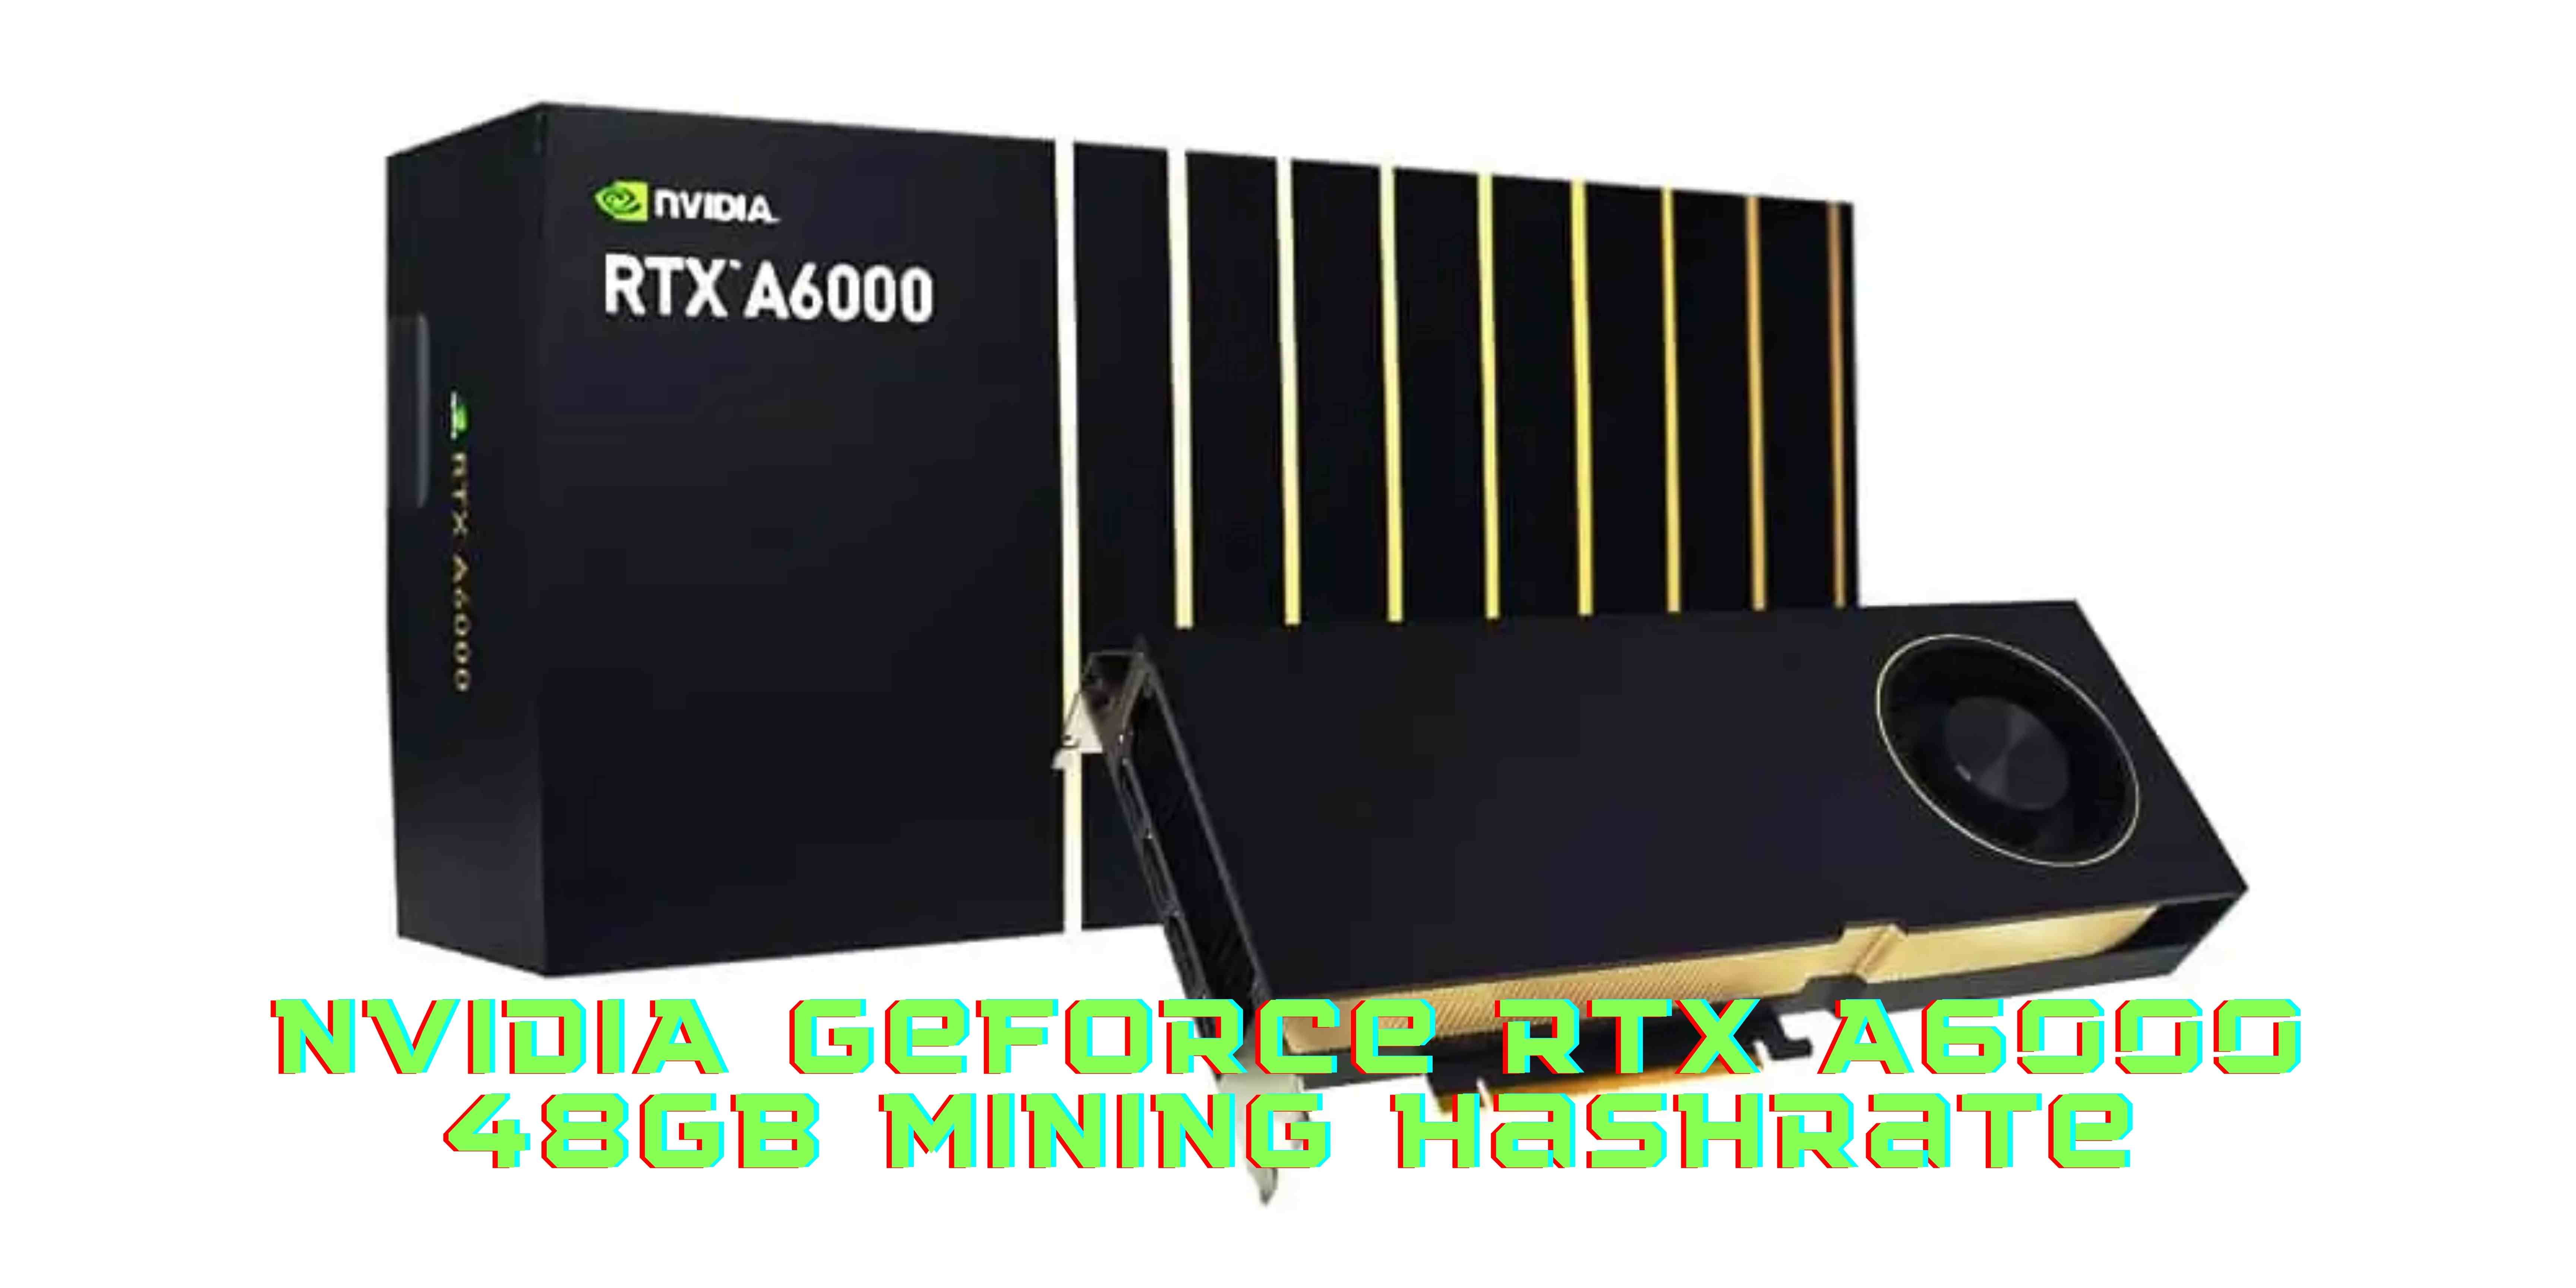 The Efficiency Of NVIDIA RTX A6000 48GB Mining Hashrate And Overclock Settings